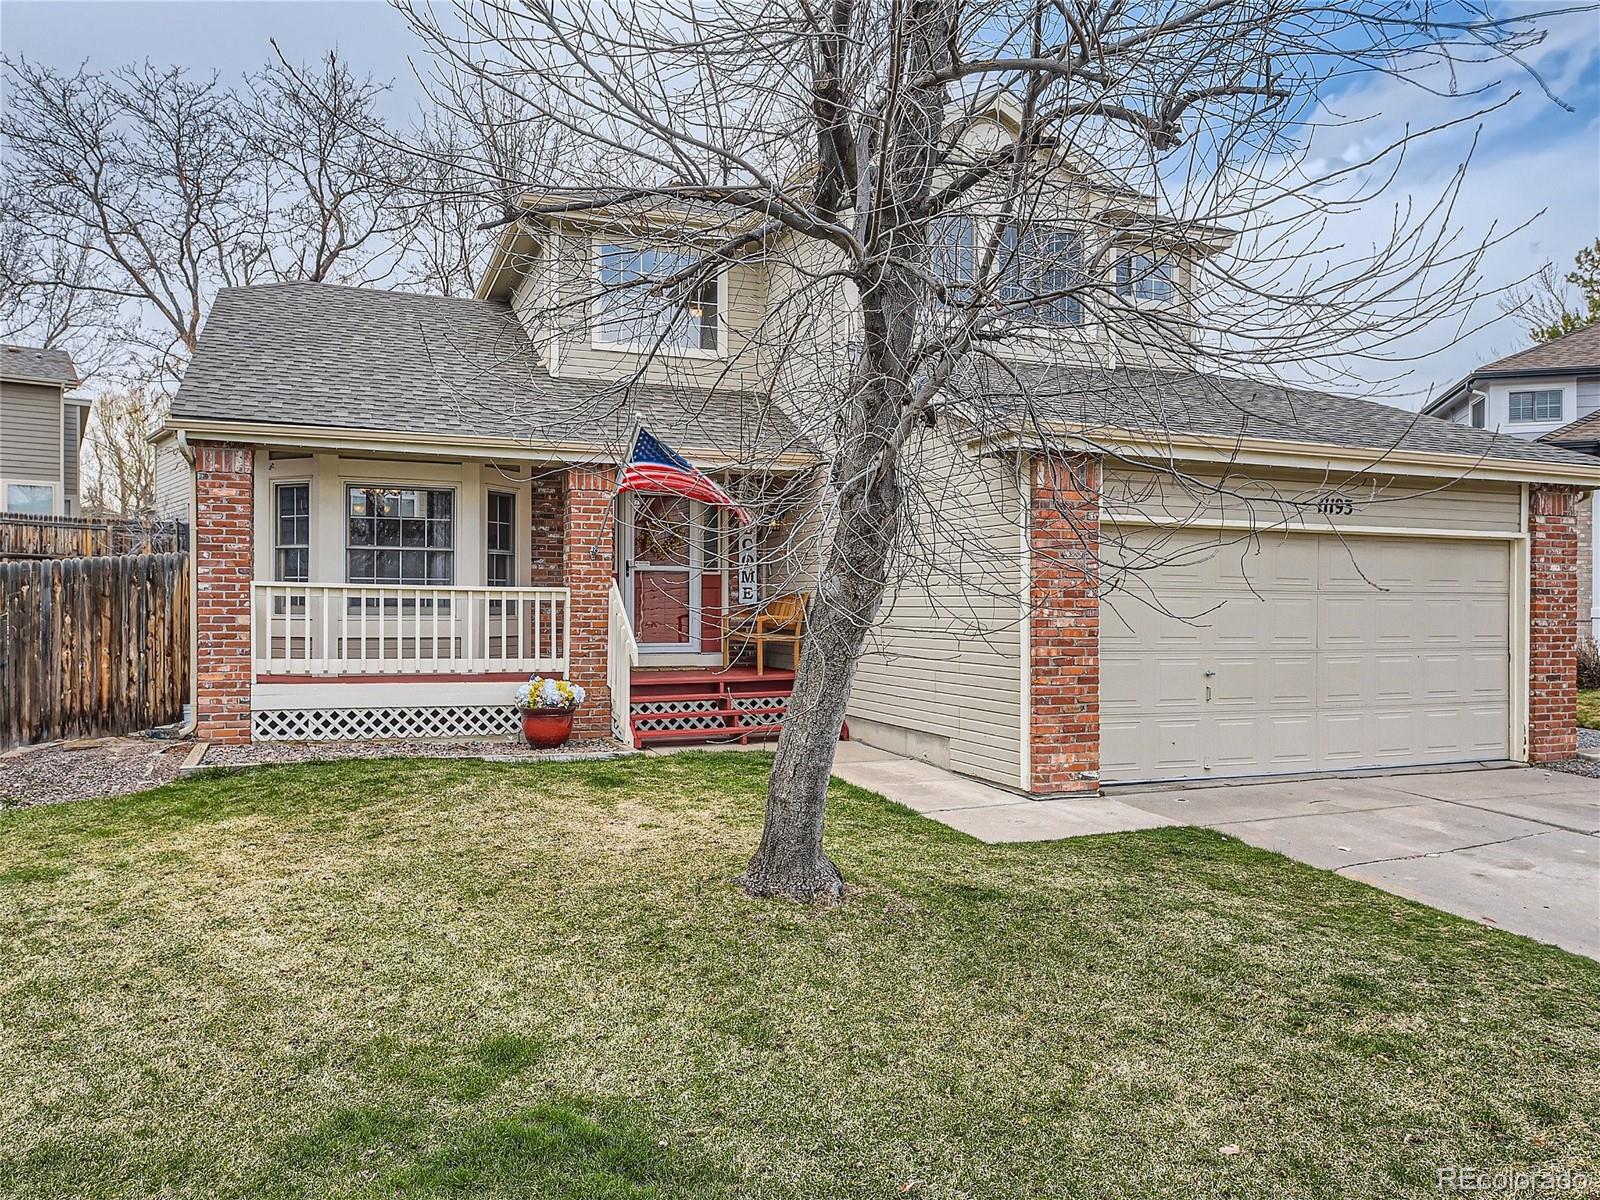 Report Image for 11193 W Geddes Avenue,Littleton, Colorado